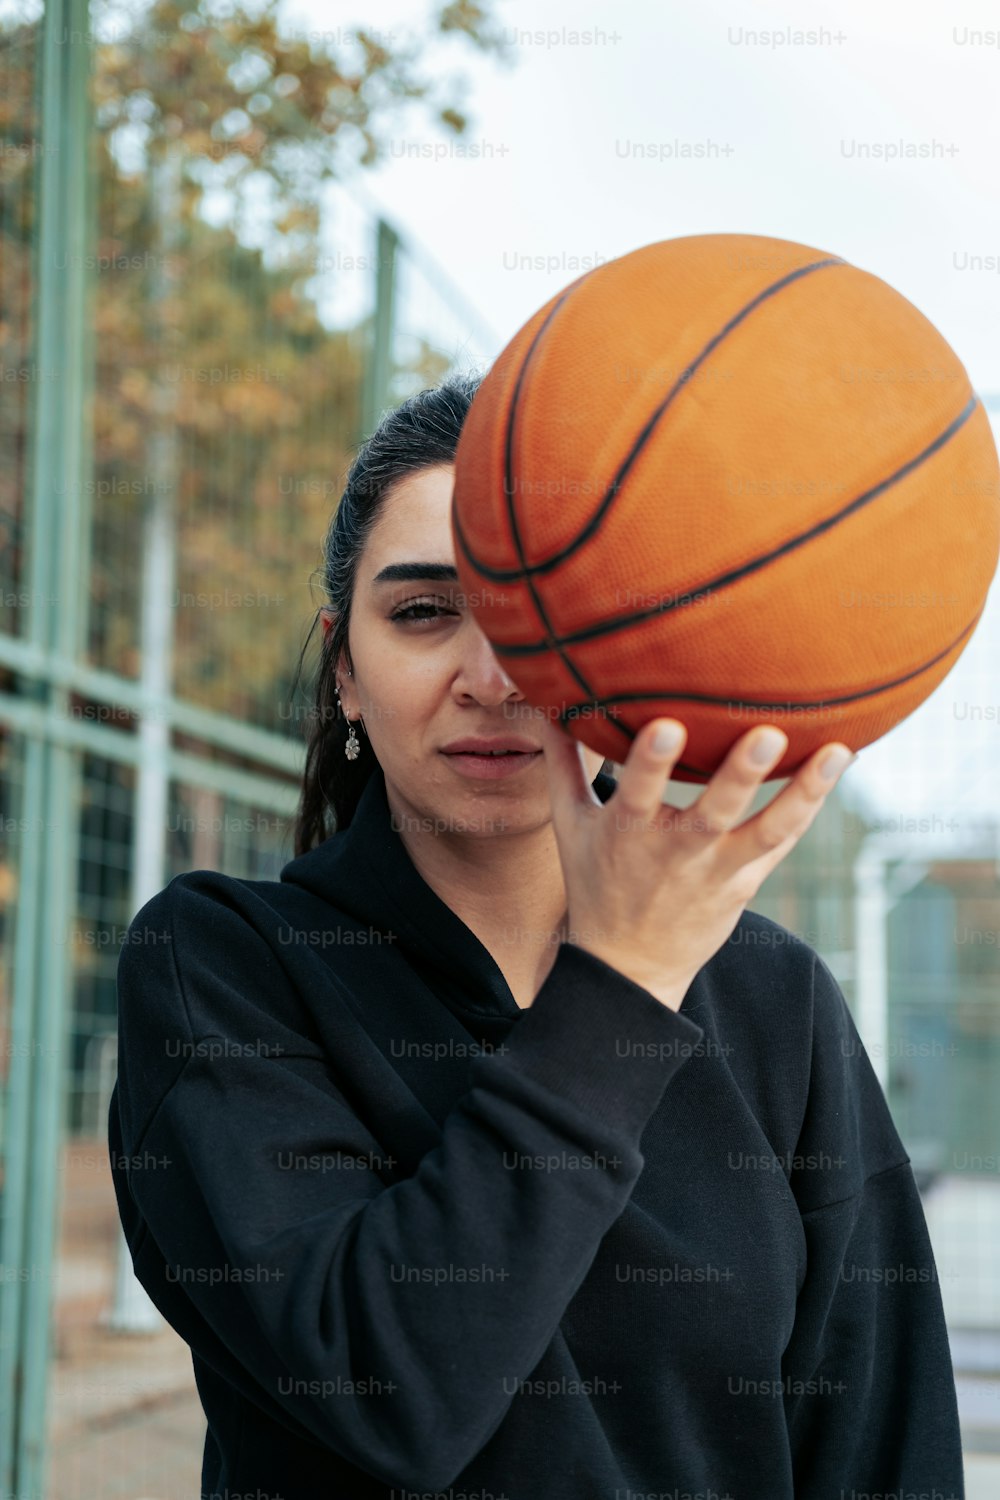 a woman holding a basketball up to her face